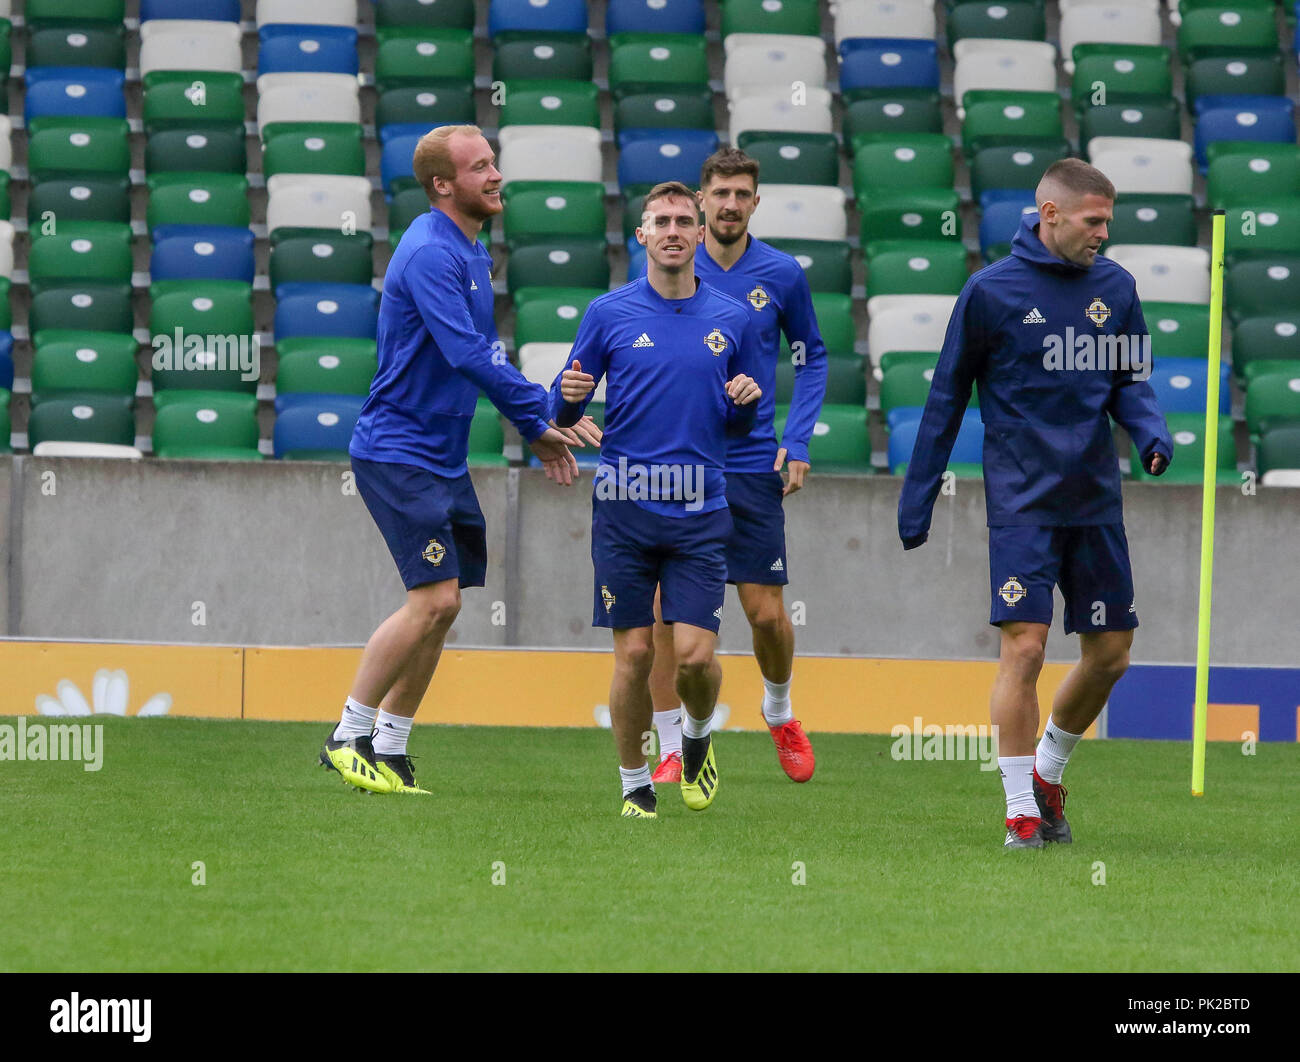 Windsor Park, Belfast, Northern Ireland. 10 September 2018. After Saturday's defeat in the UEFA Nations League, Northern Ireland returned to training this morning at Windsor Park. Tomorrow night they play Israel in a friendly international. Gavin Whyte (centre). Credit: David Hunter/Alamy Live News. Stock Photo